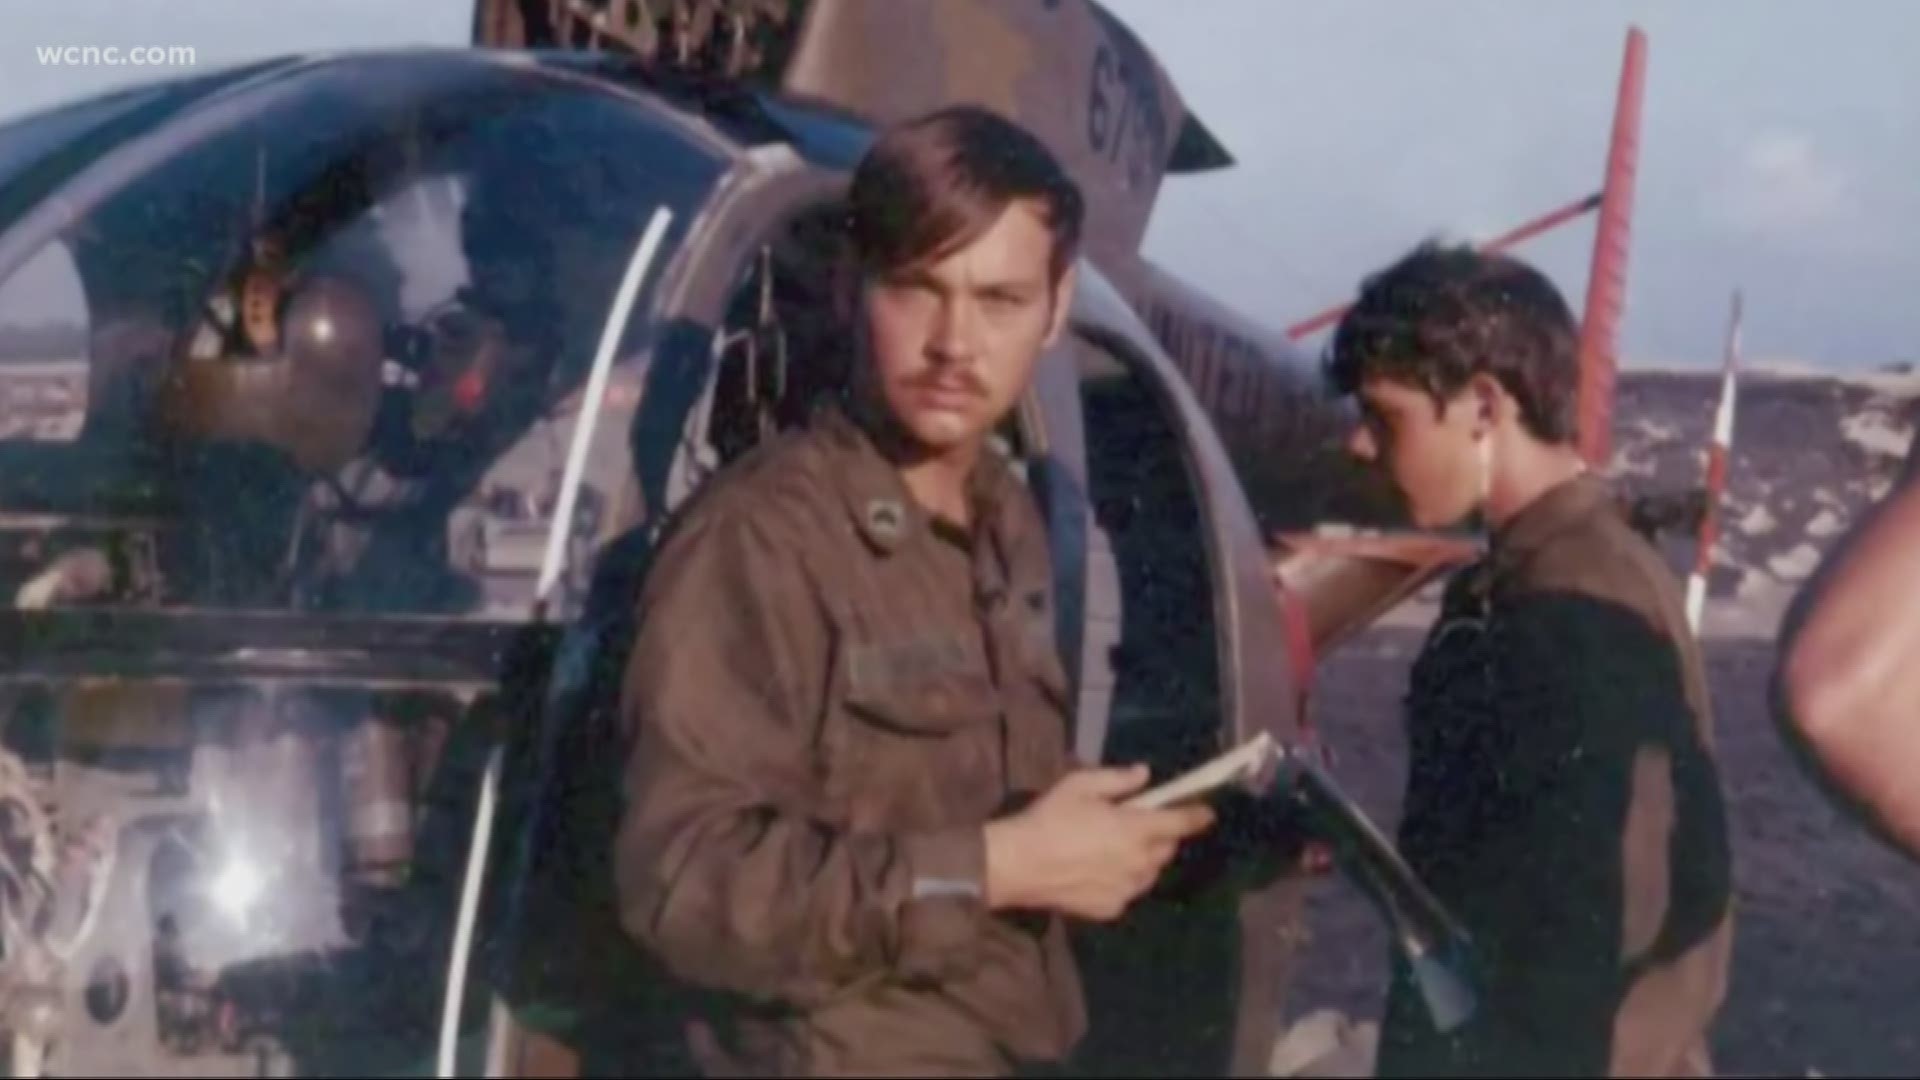 Lt. Colonel Frank Walker was drafted into the Vietnam War and piloted an OH-6A chopper.